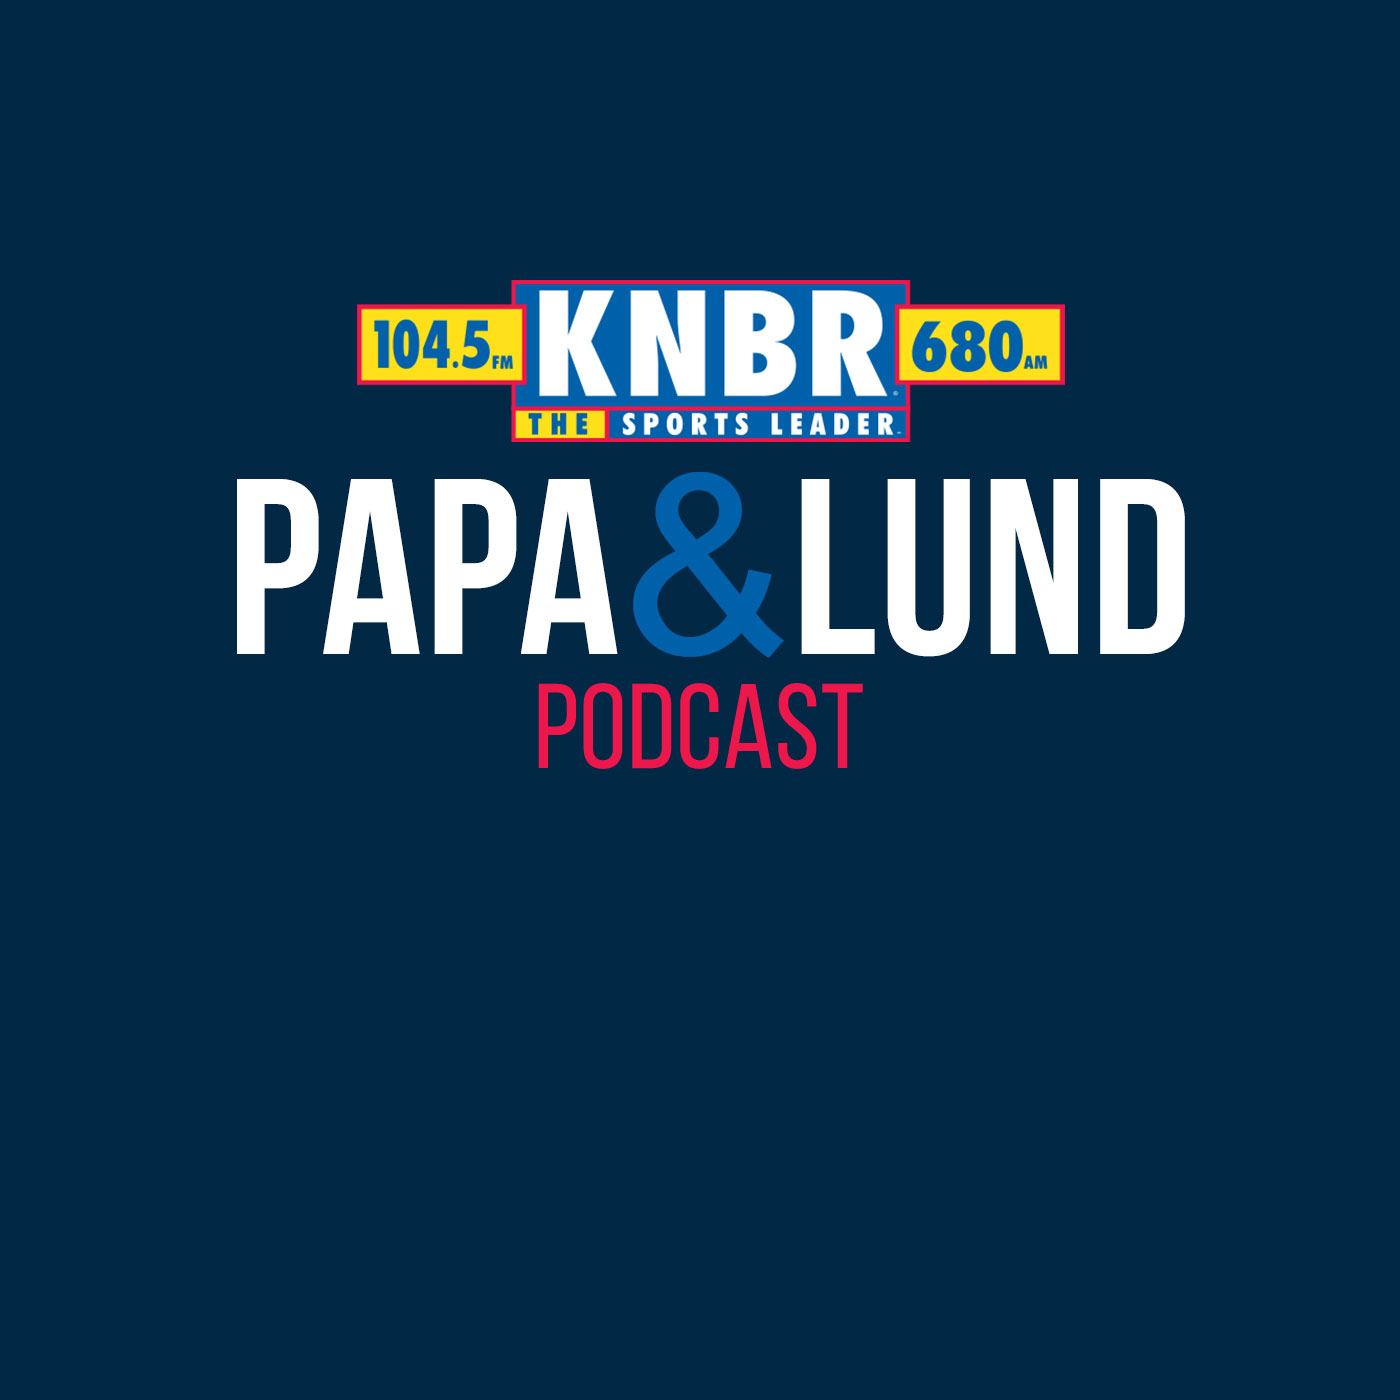 11-30 Papa & Lund discuss if Brock Purdy outperforms Jalen Hurts in Philly, if that would then change the perception of Brock Purdy and make him a legitimate MVP Candidate